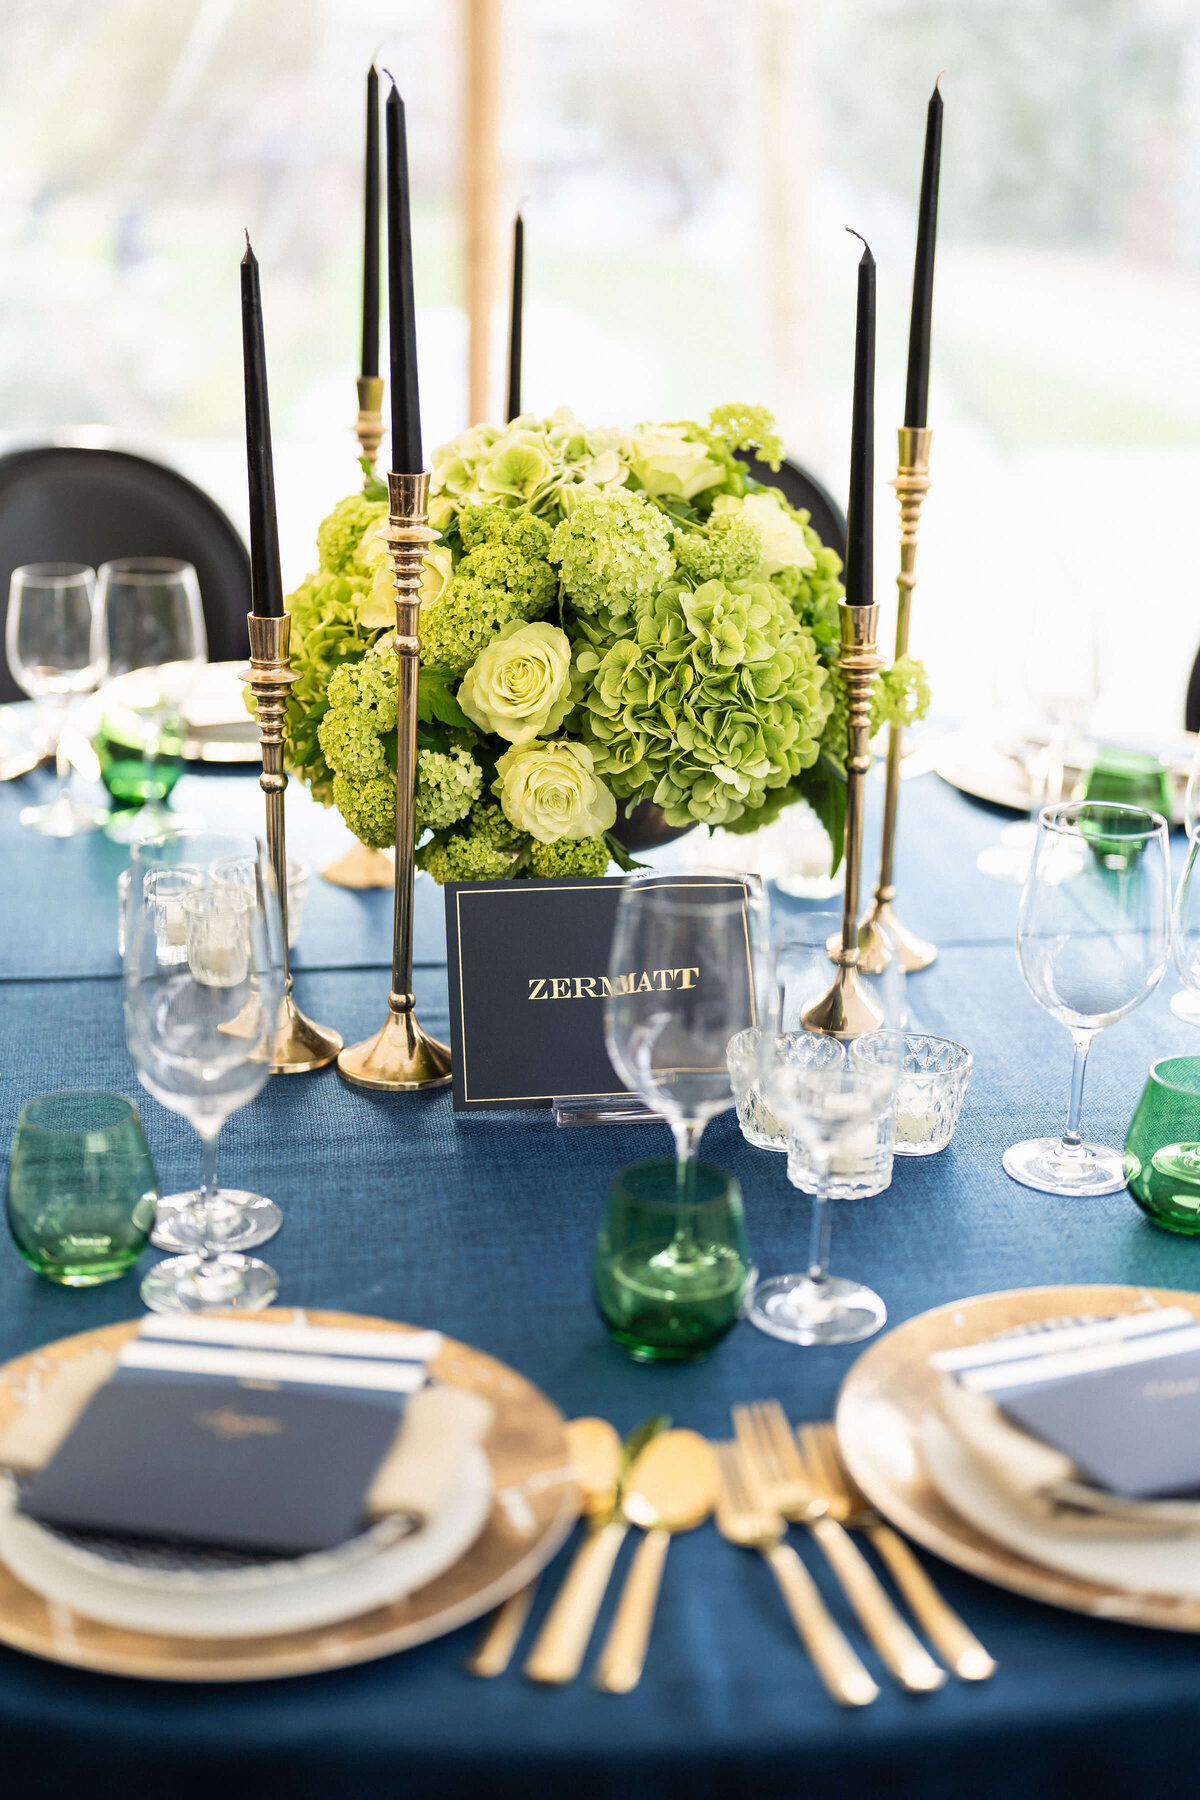 lime green flower arrangements in the centre of a round dinner table laid with navy blue linen and gold table settings for a birthday party at avington park